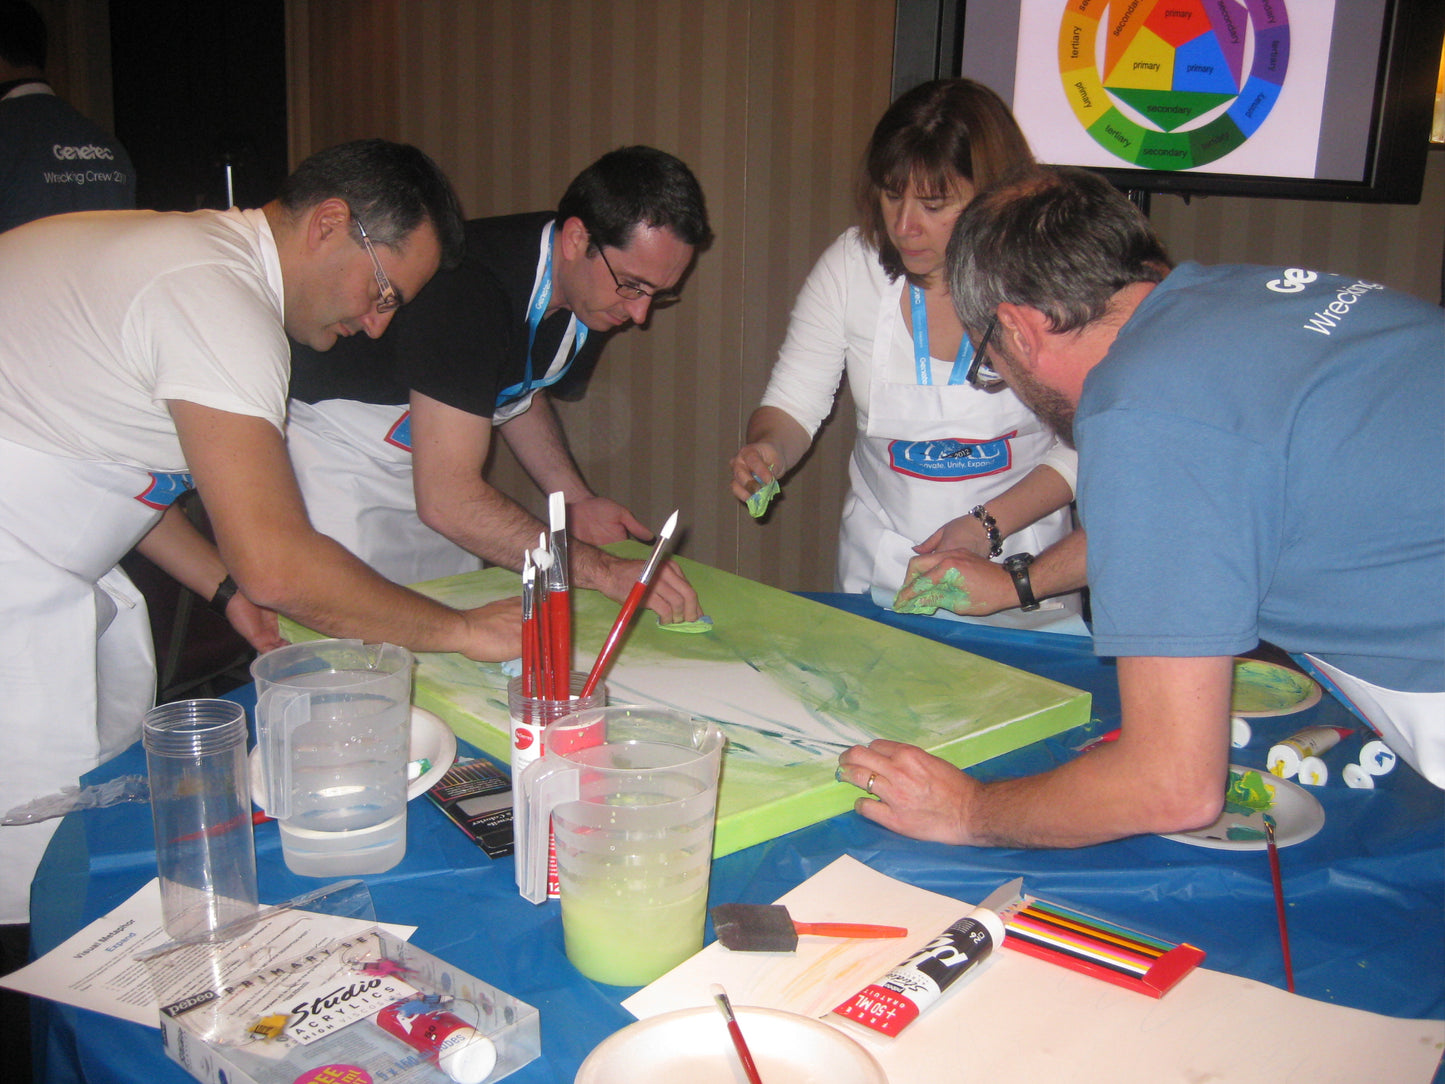 Conference Workshop - A Team Masterpiece - A Team Masterpiece - pricing on demand